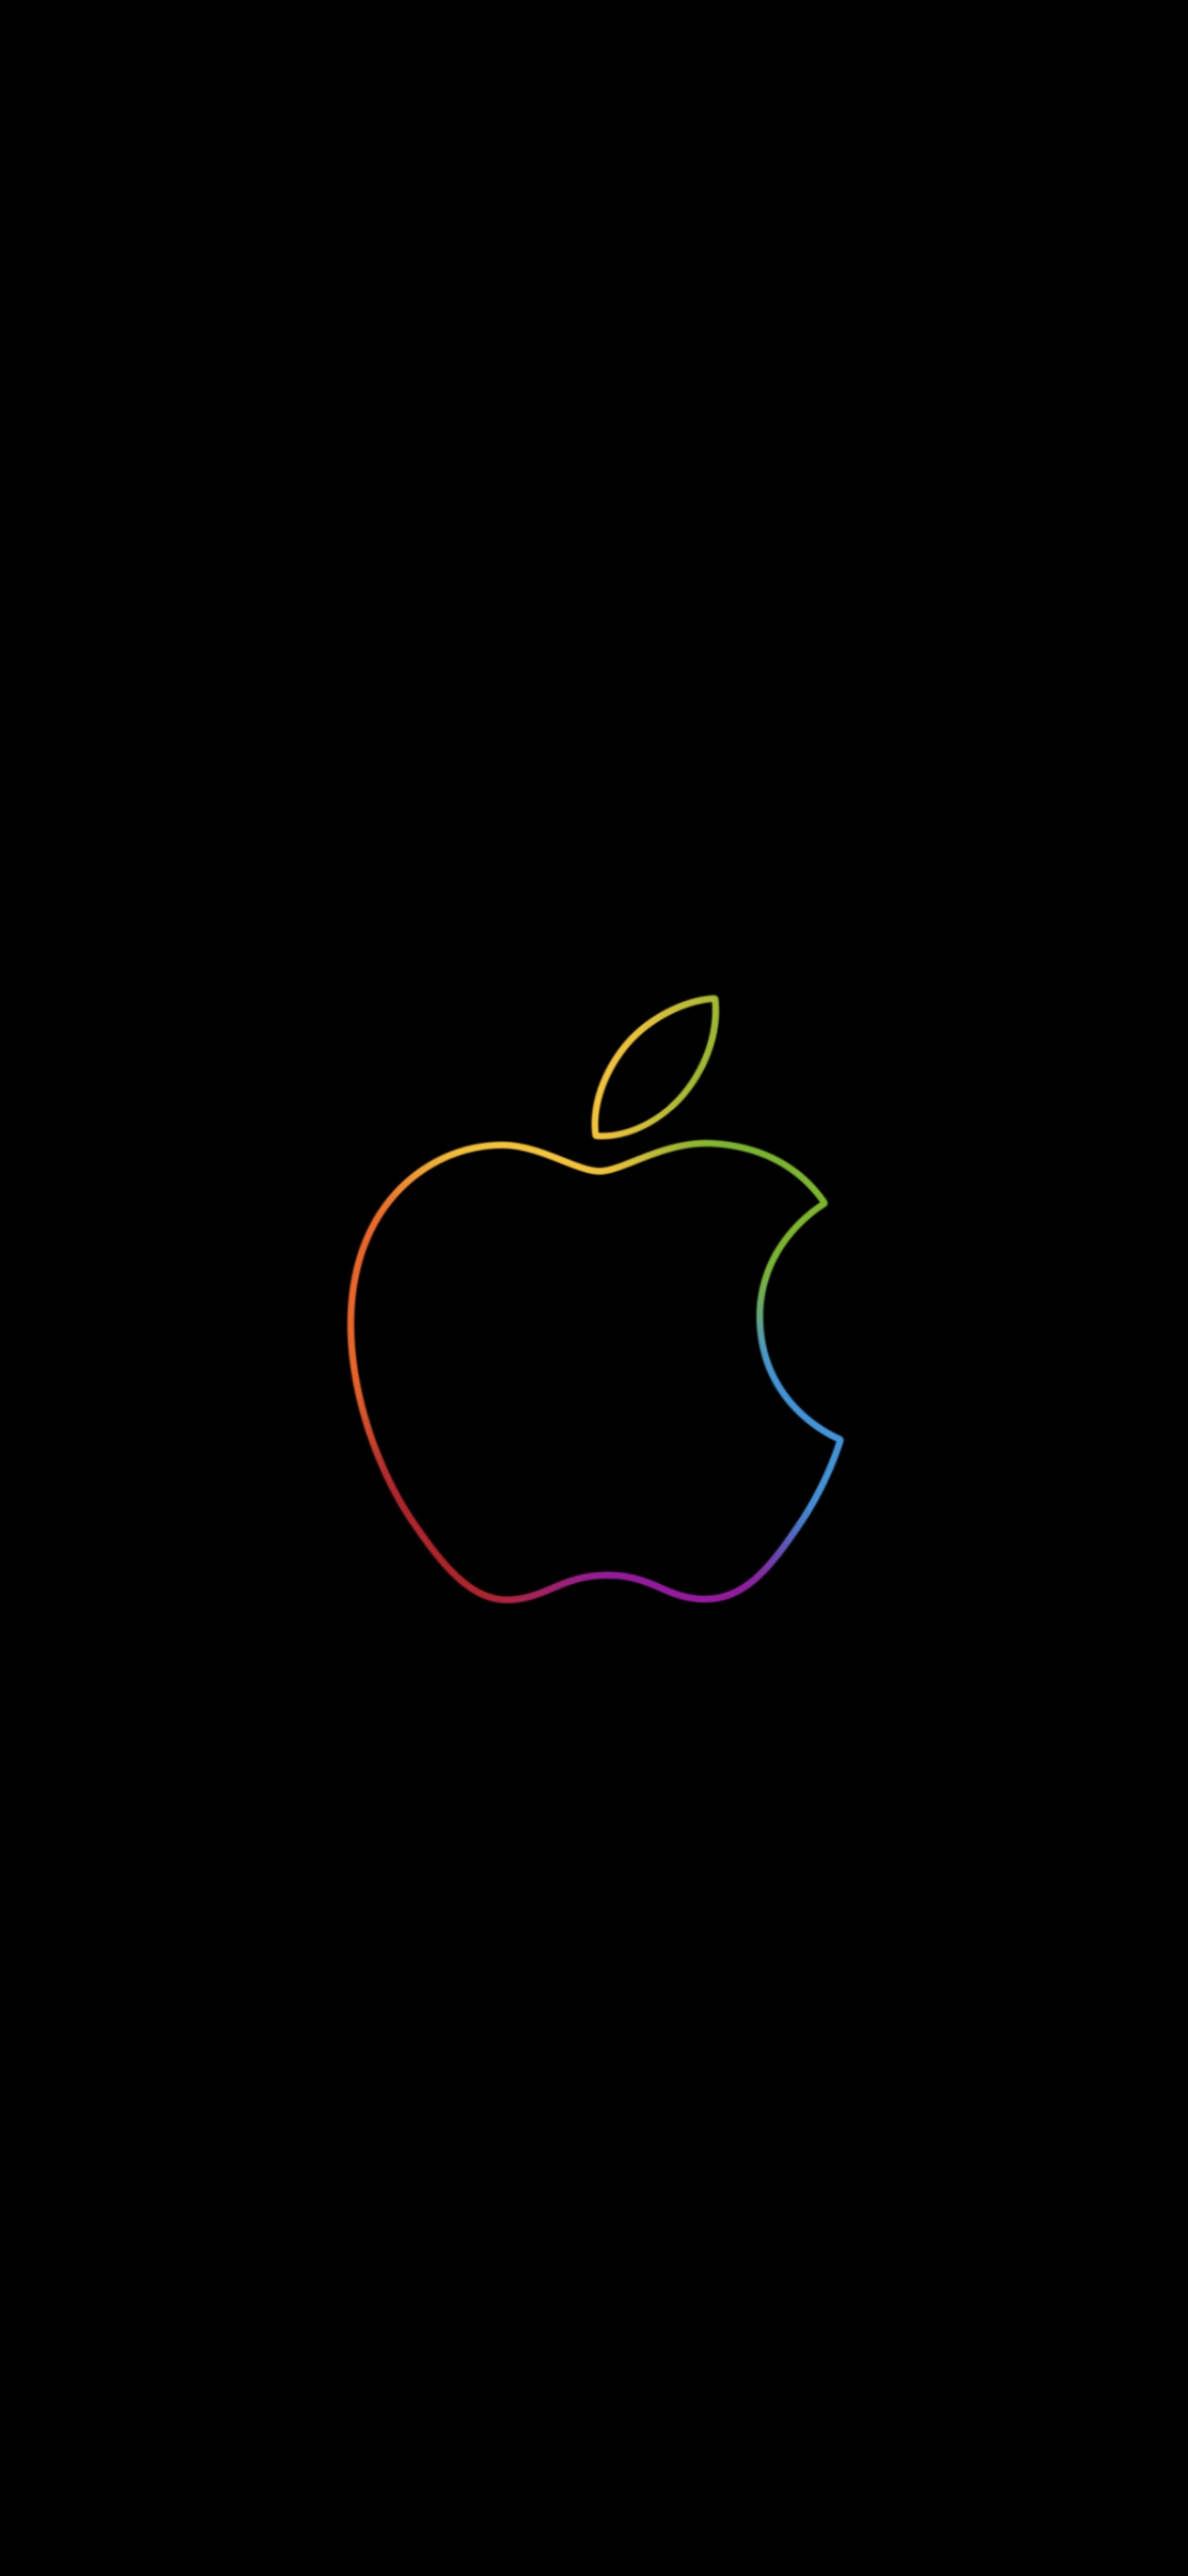 Apple Event Rainbow Logo Static Version Event Wallpapers Central